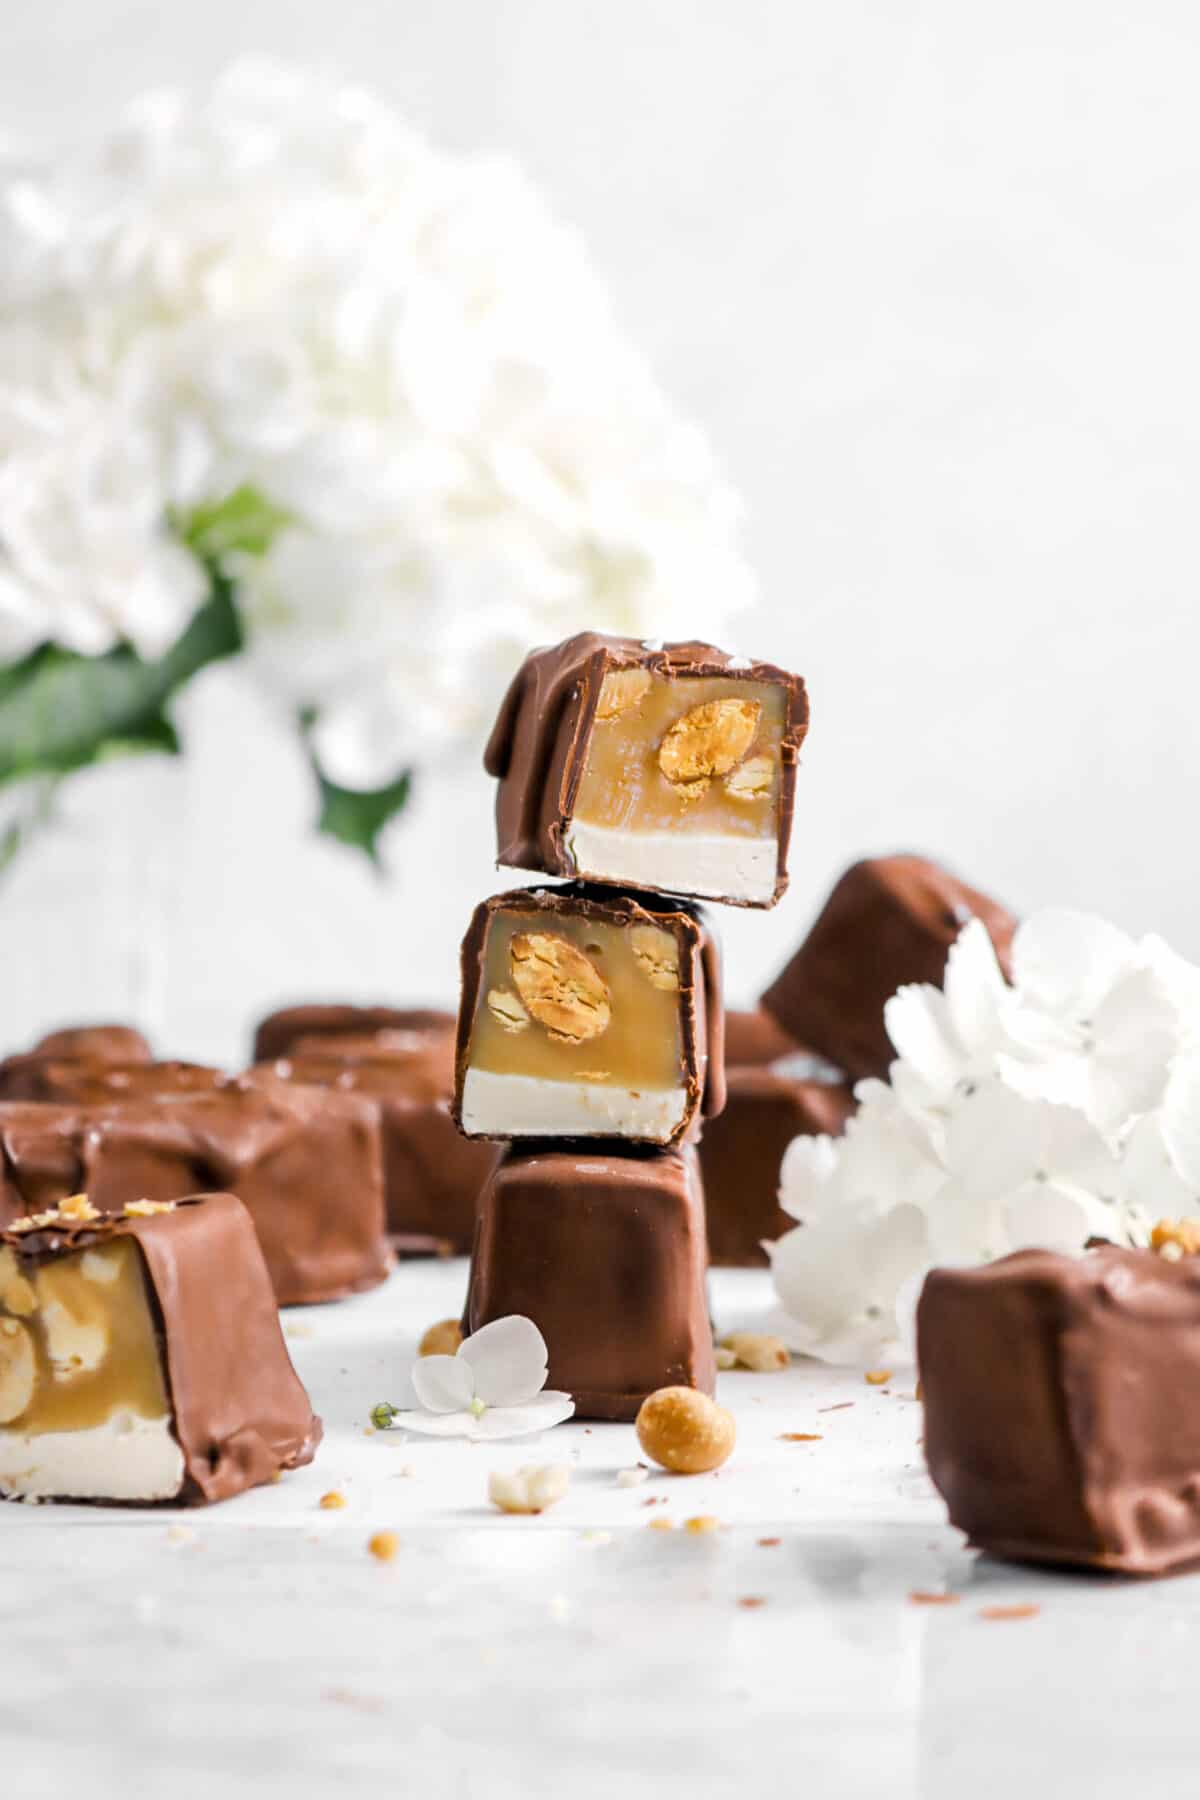 Homemade Snickers Candy Bars